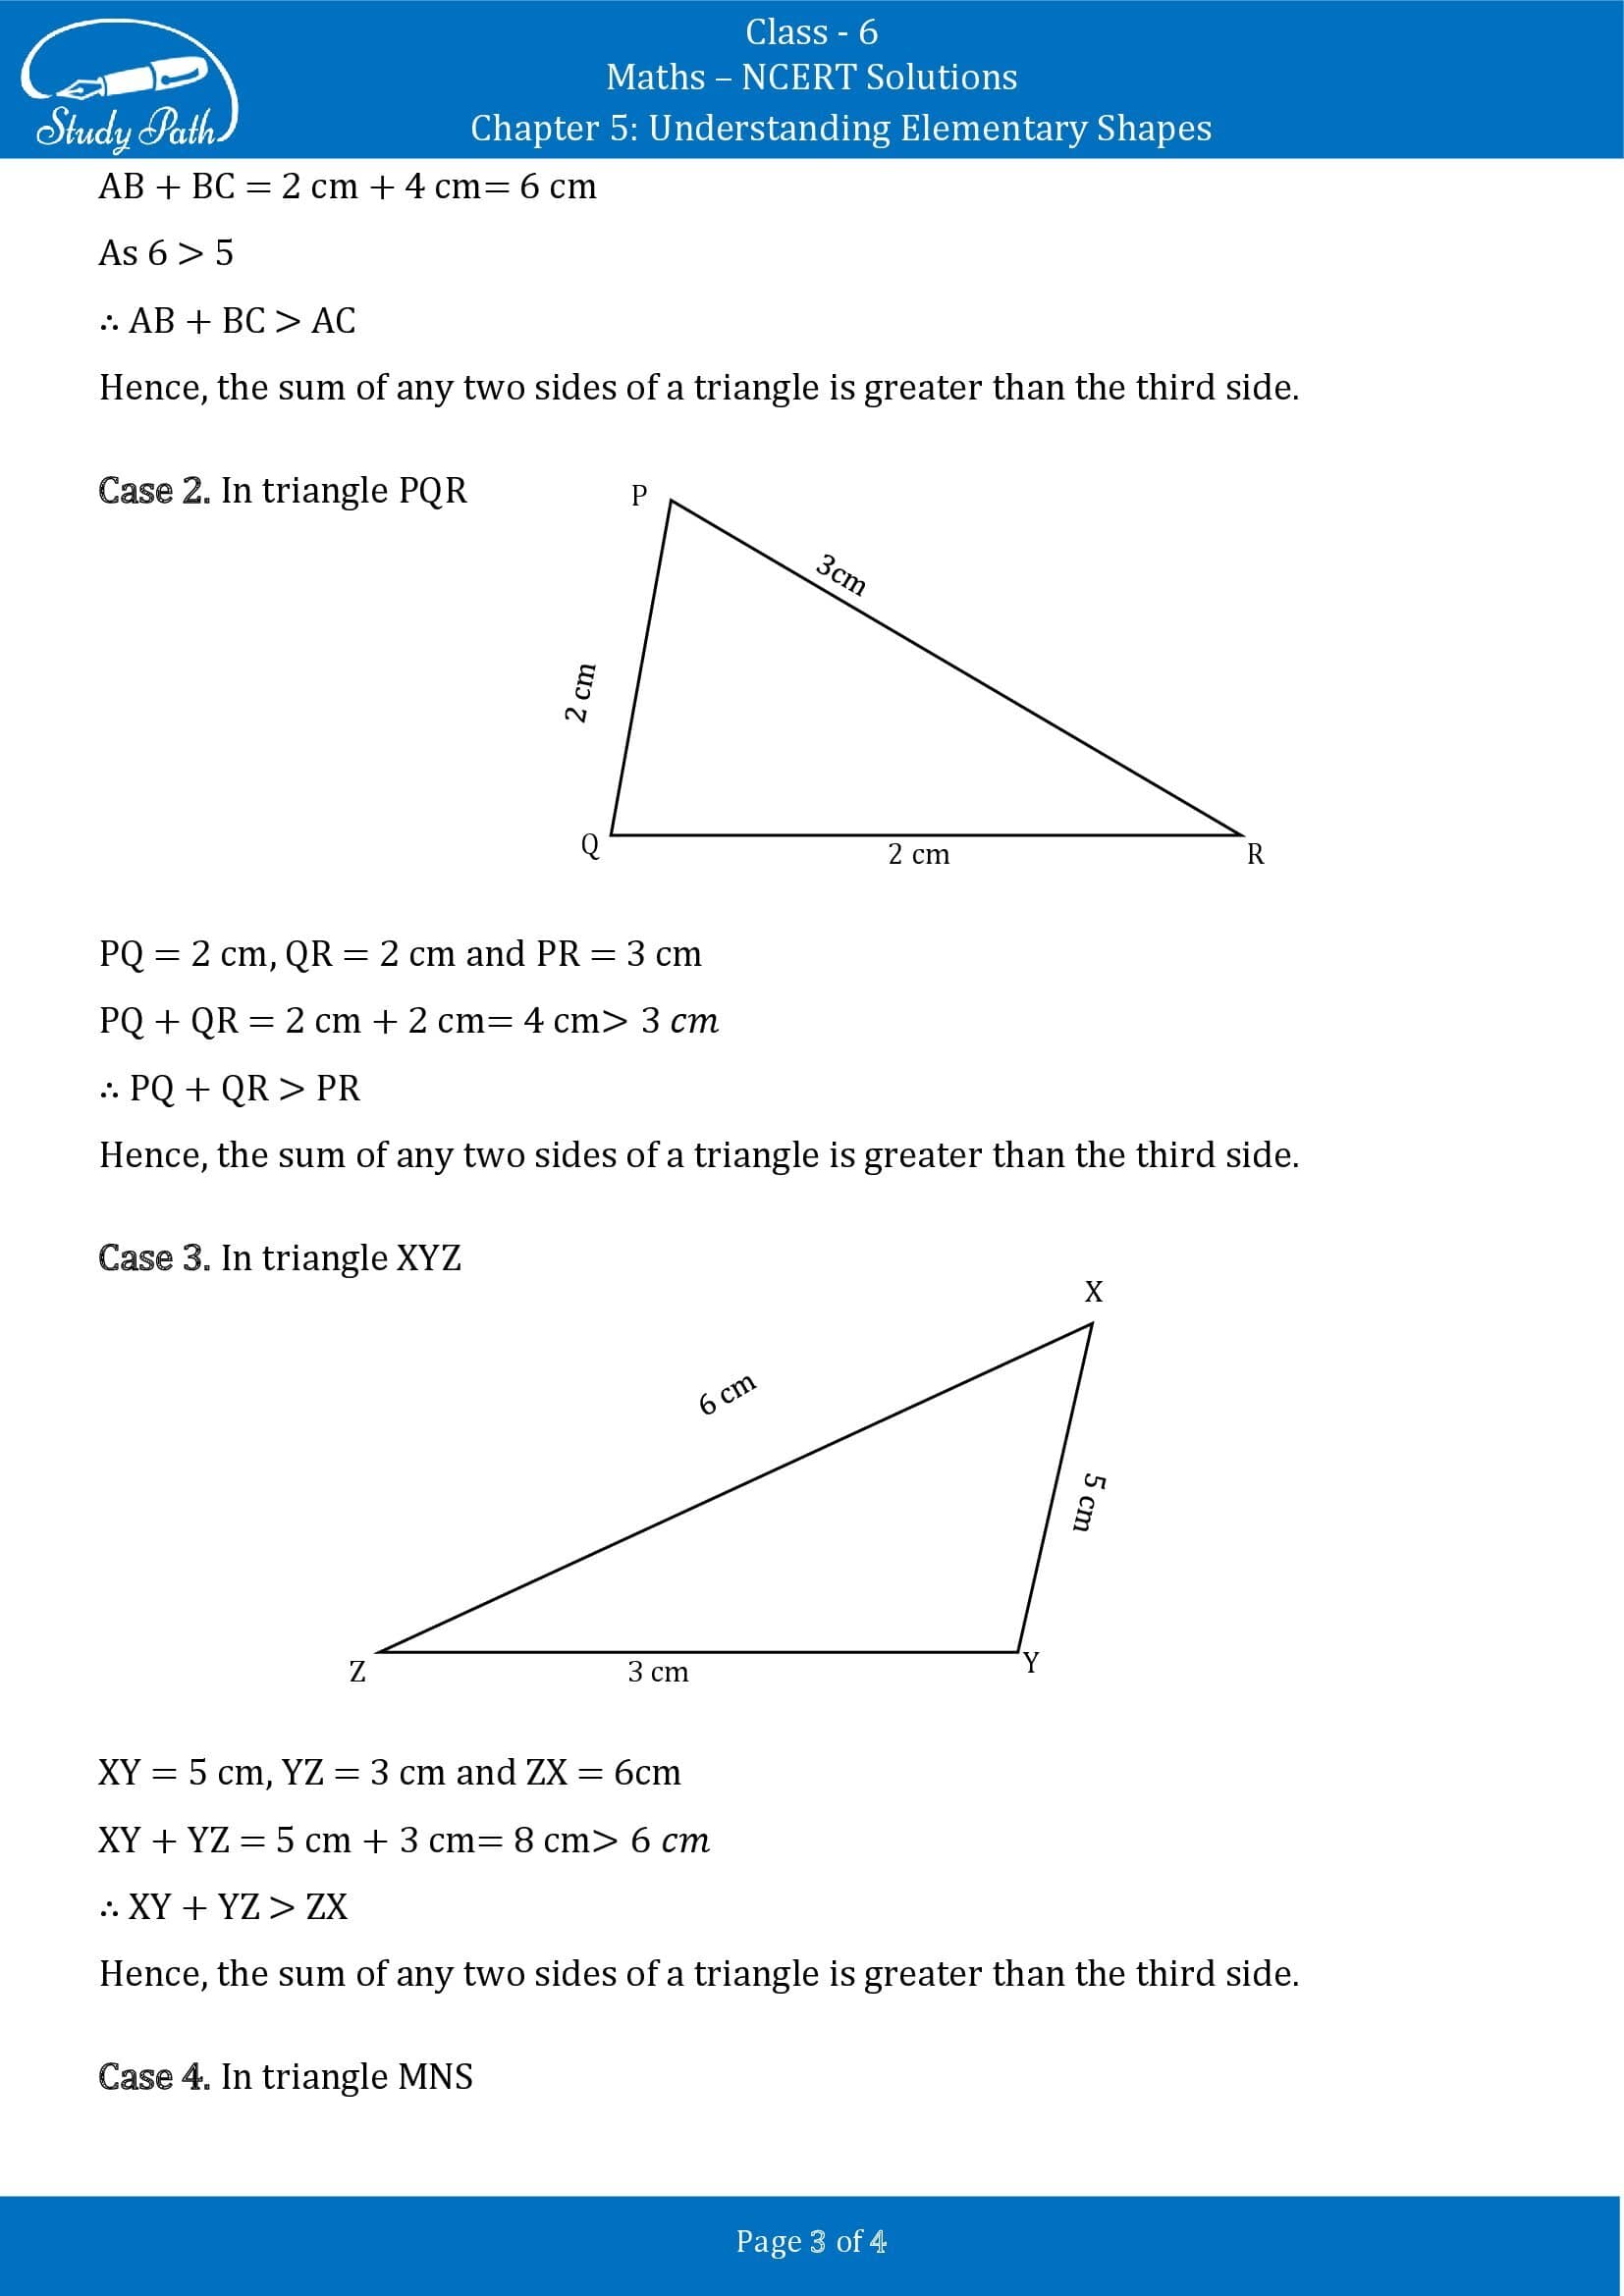 NCERT Solutions for Class 6 Maths Chapter 5 Understanding Elementary Shapes Exercise 5.1 00003